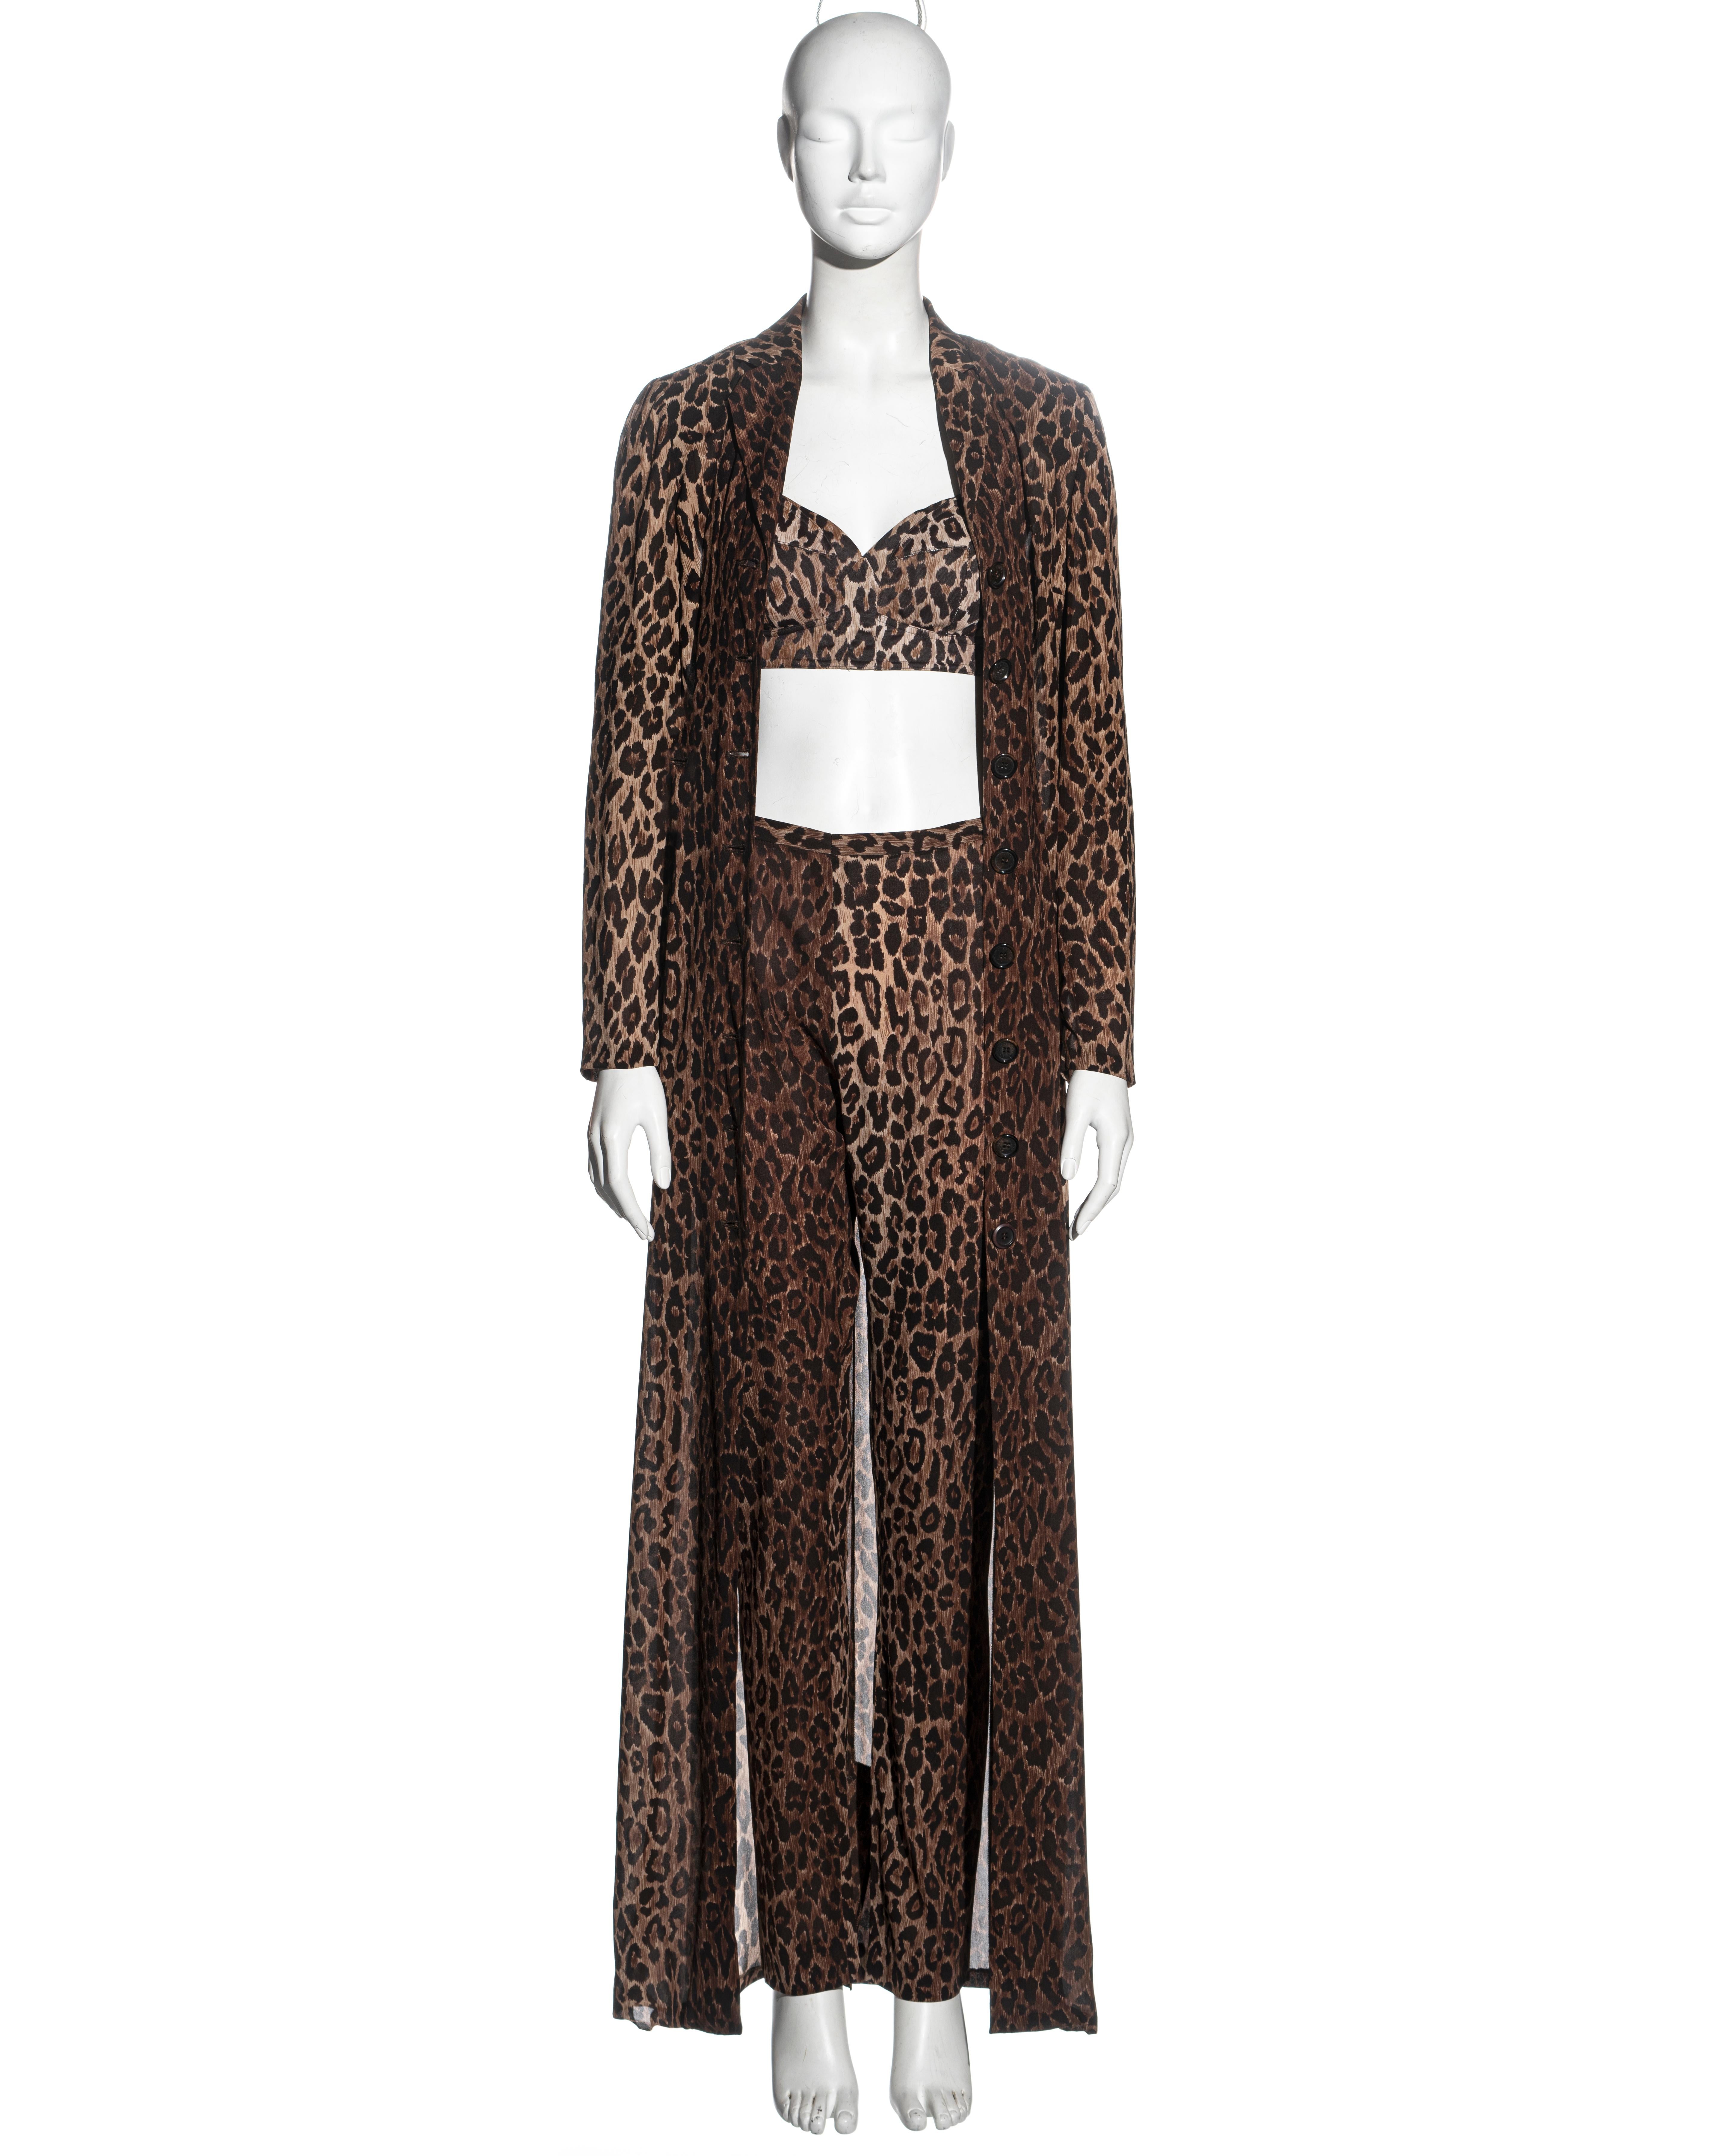 ▪ Dolce & Gabbana leopard print ensemble 
▪ Brown leopard printed silk 
▪ Lightweight floor-length single-breasted coat 
▪ High-waisted straight leg trousers 
▪ Matching nylon bra top 
▪ IT 40 - FR 36 - UK 8
▪ Spring-Summer 1997
▪ Coat and jacket: